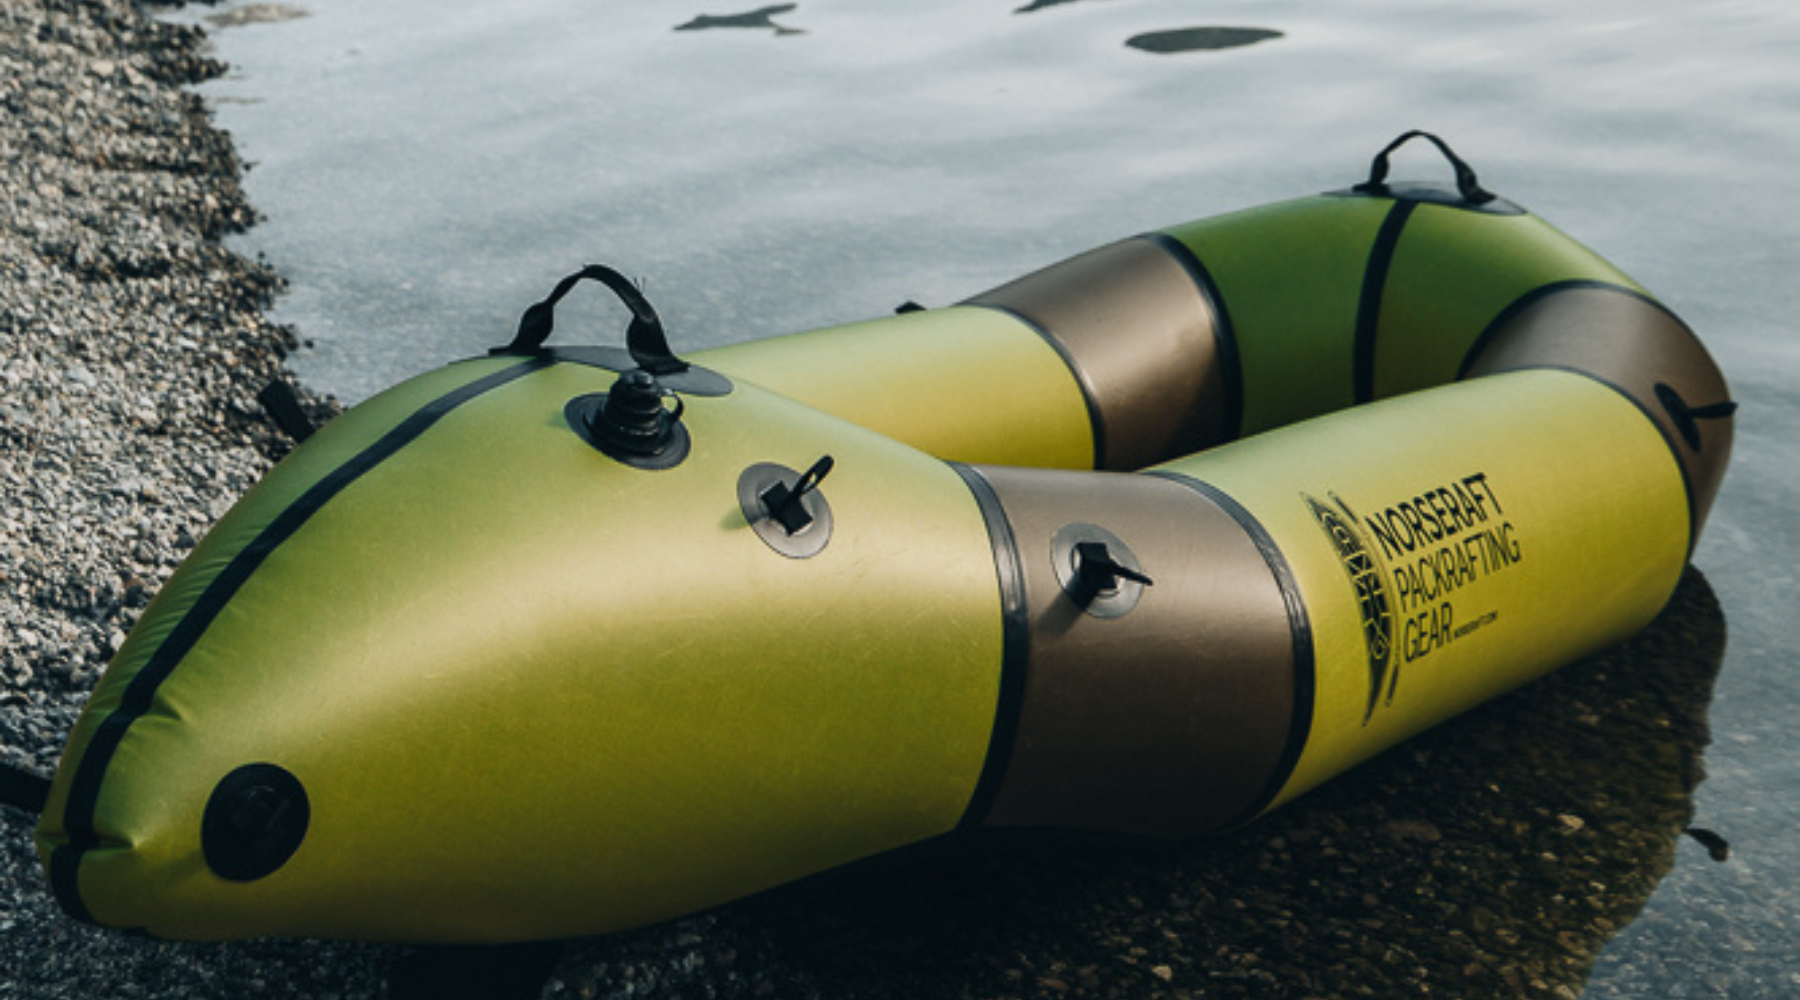 How to inflate your Packraft